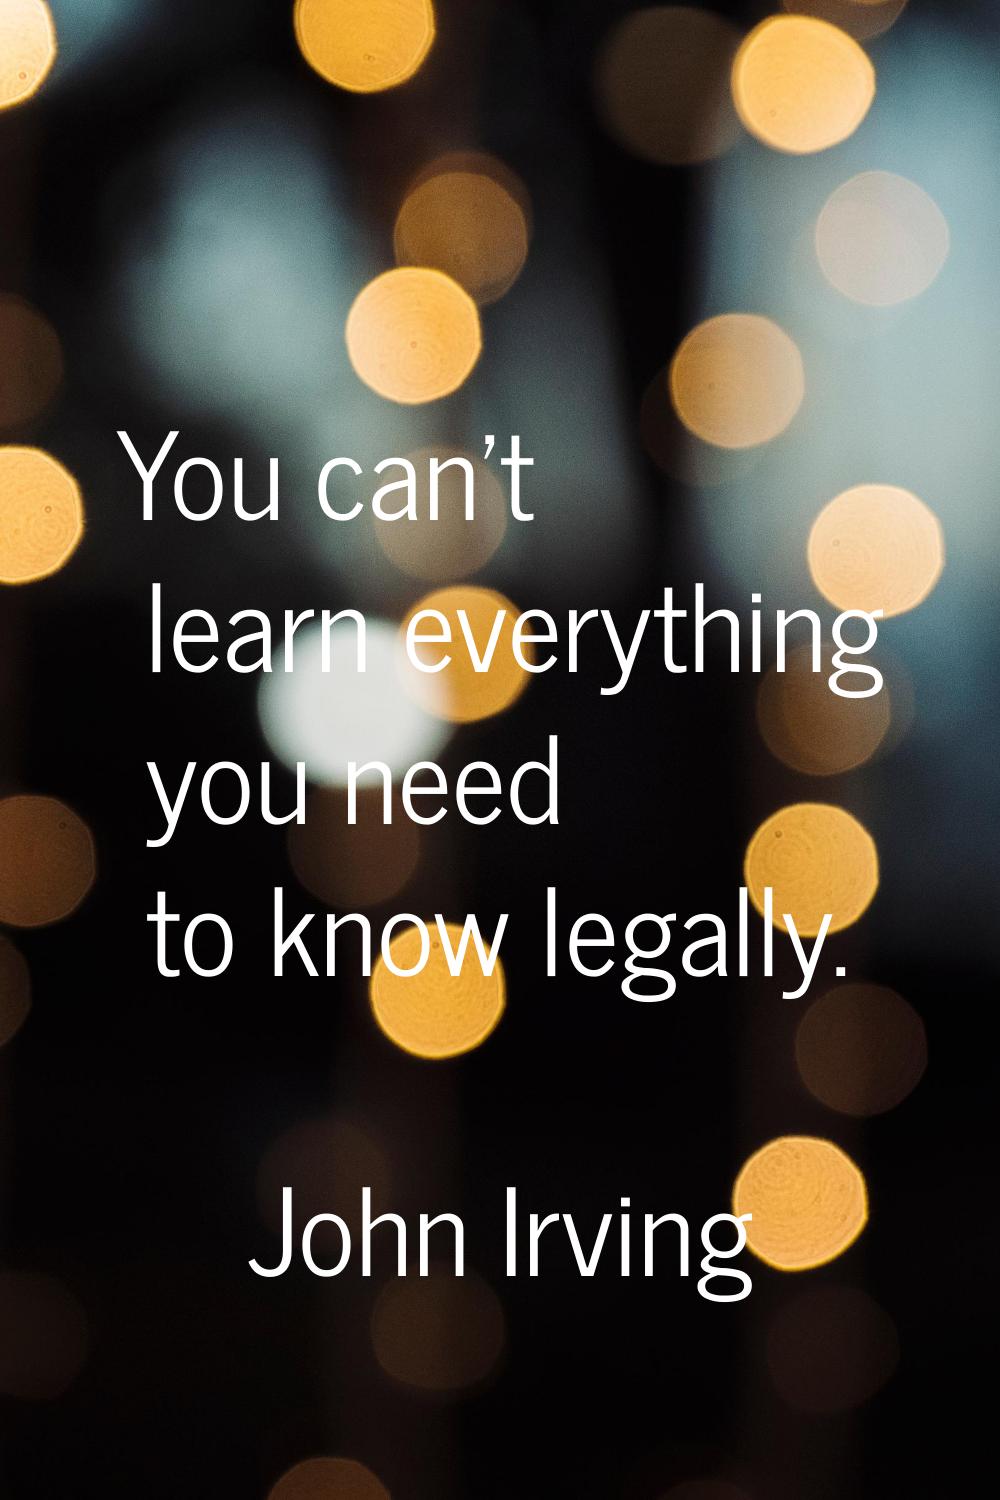 You can't learn everything you need to know legally.